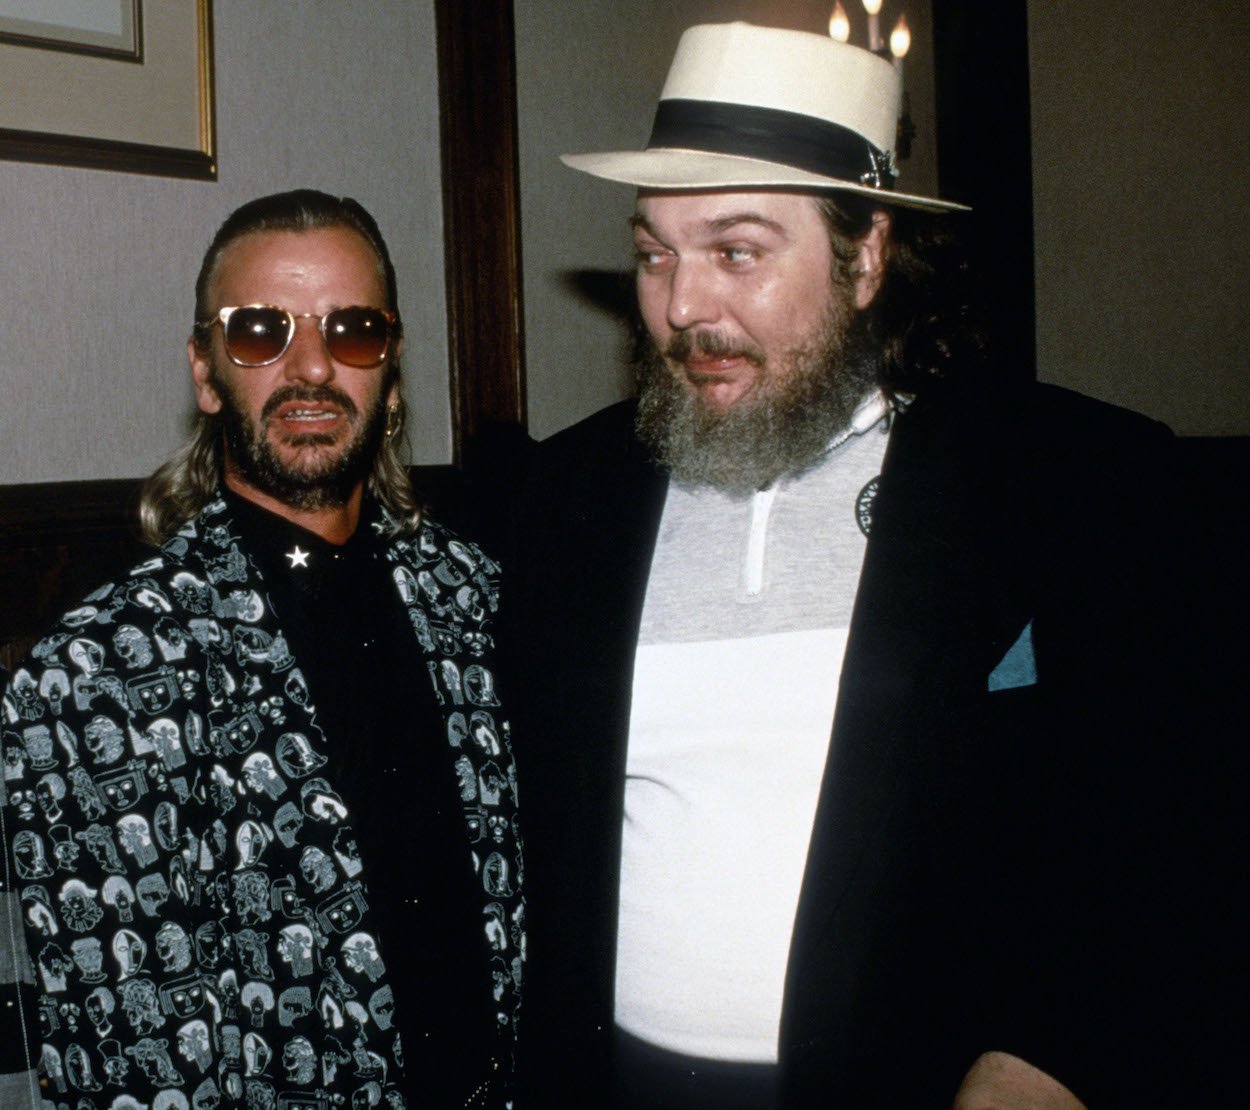 Ringo Starr (left) and Dr. John in New York City circa 1989 and the first All-Starr Band tour.